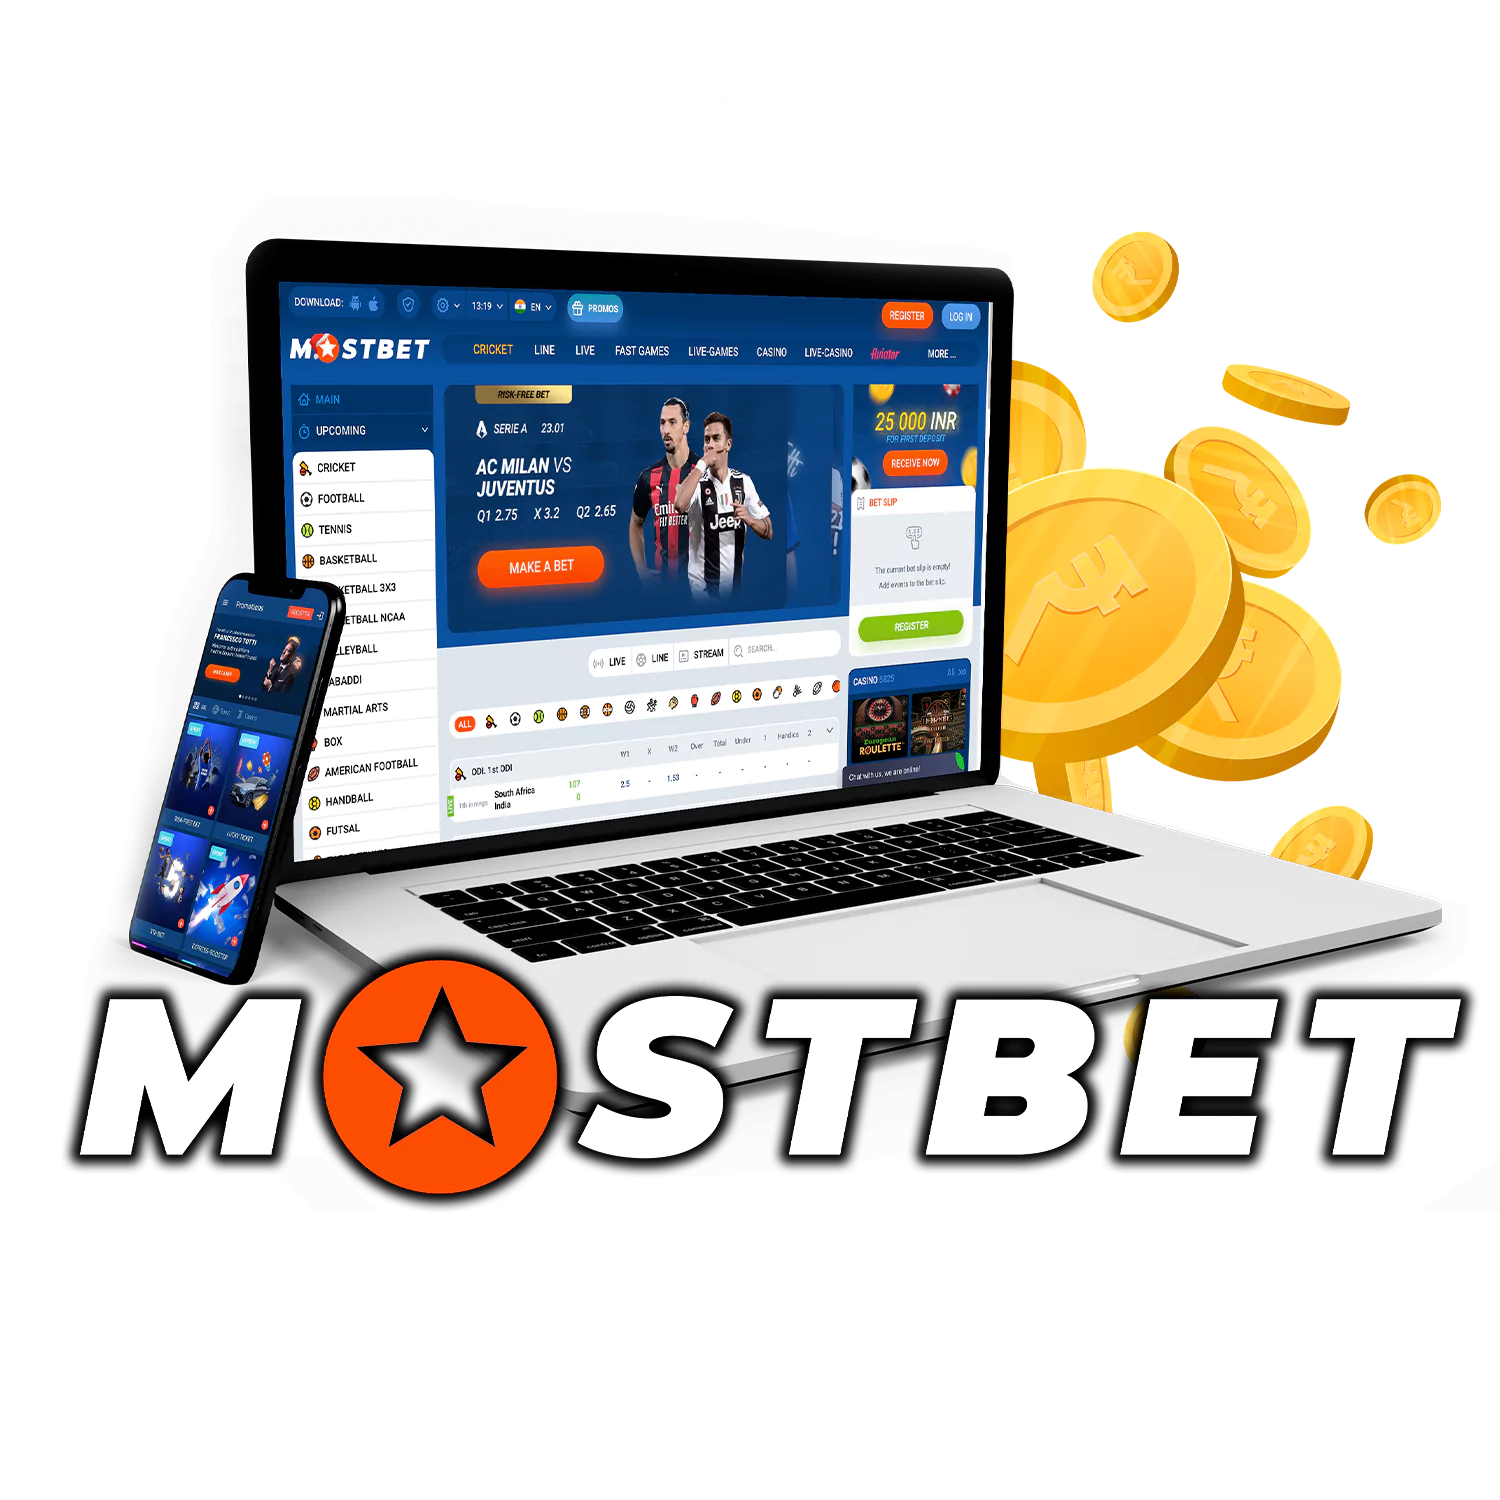 Here Is A Method That Is Helping Login to Mostbet in Bangladesh